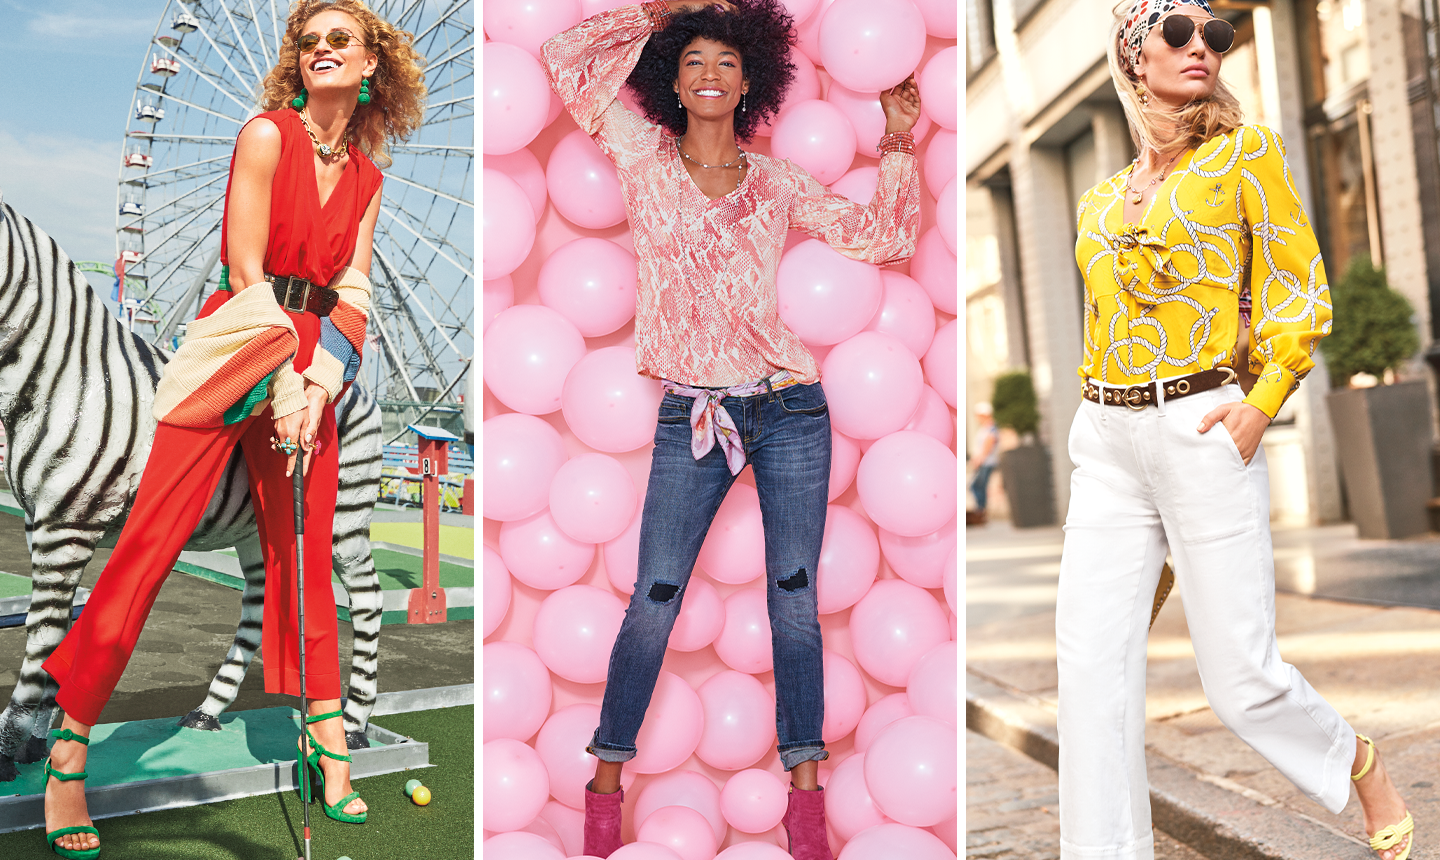 spring 2020 trend report: a bright, colorful tomorrow